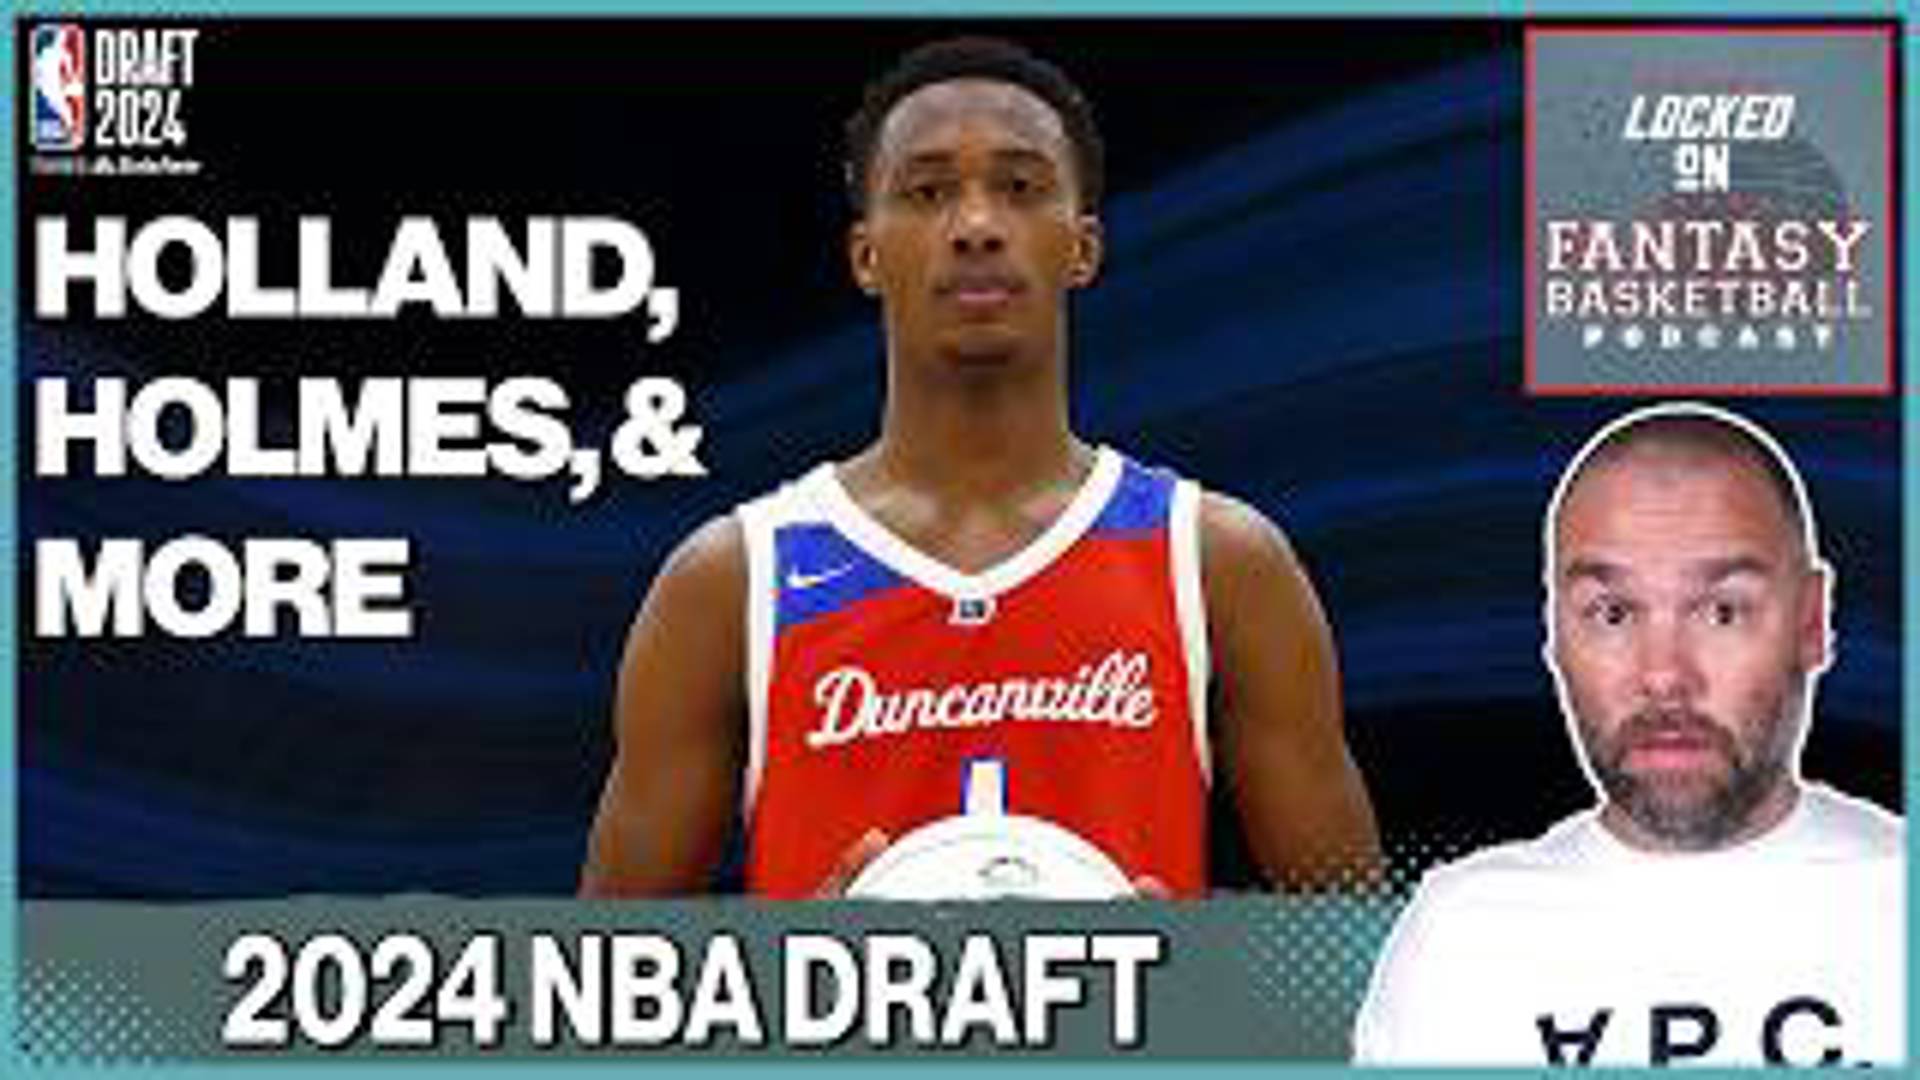 Join Josh Lloyd on the Locked On Fantasy Basketball podcast as he dives deep into the 2024 NBA Draft prospects. In this episode, Josh discusses Ron Holland.